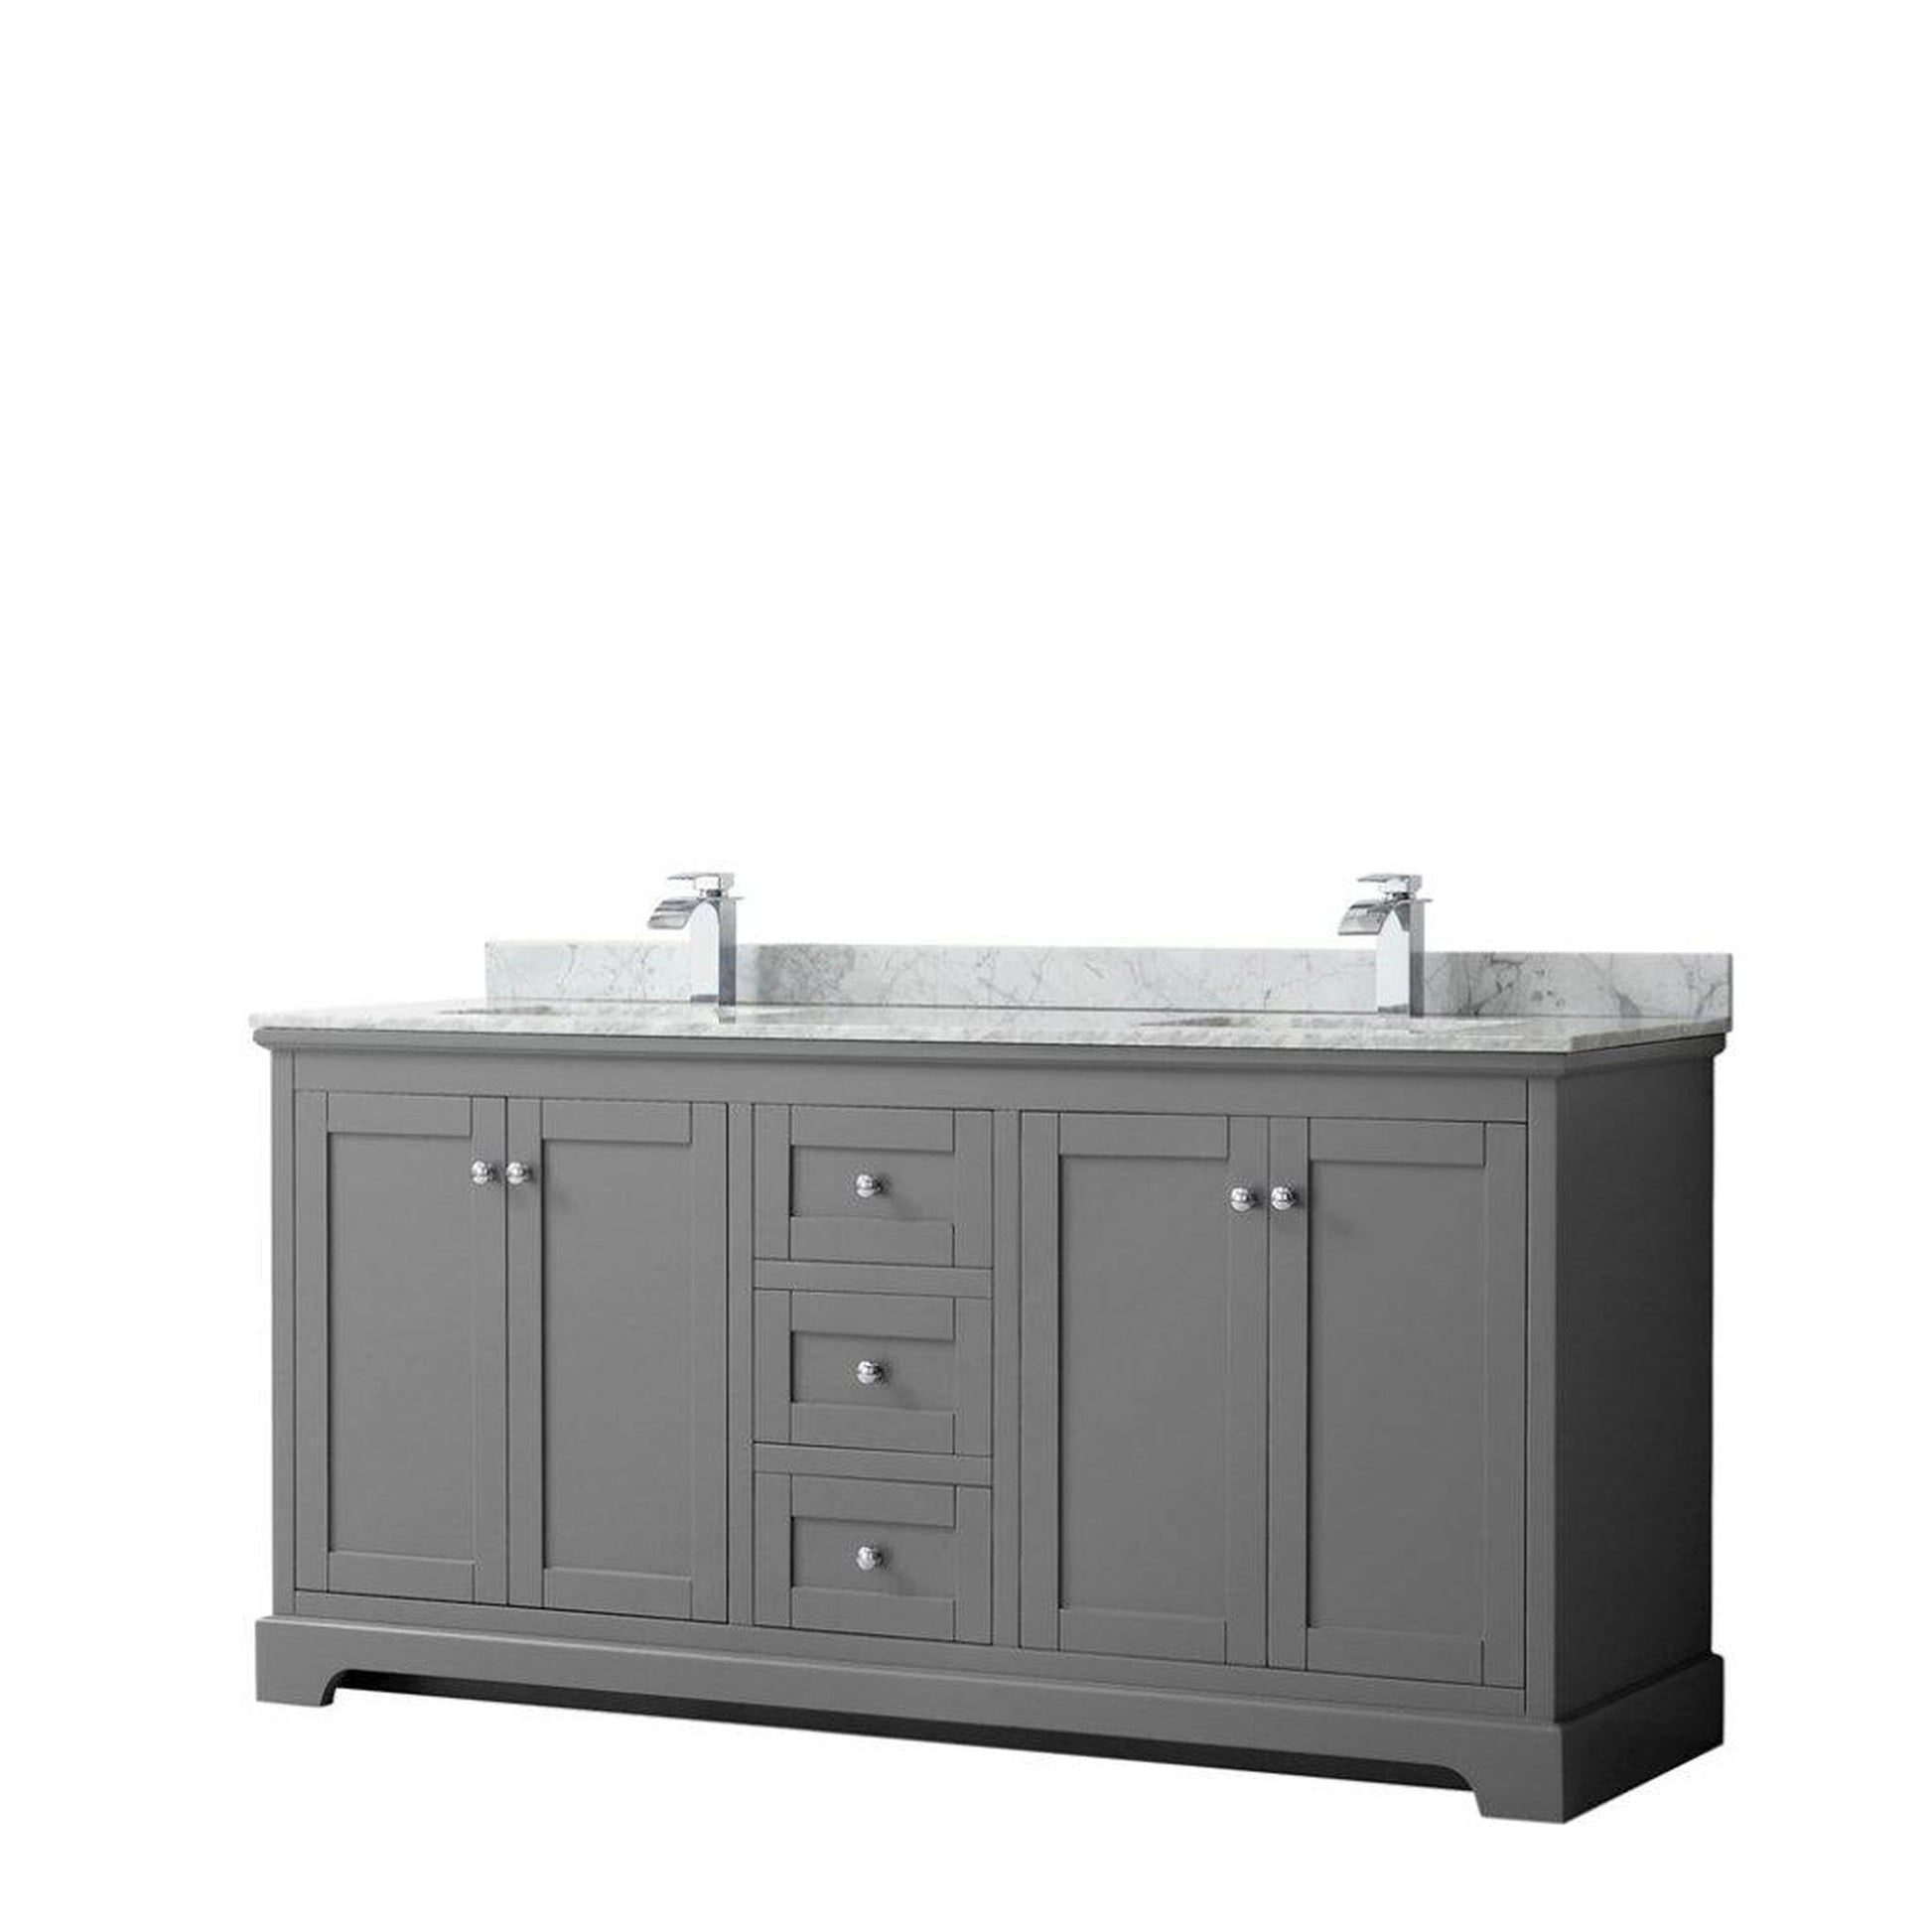 Wyndham Collection Avery 72" Dark Gray Double Bathroom Vanity With White Carrara Marble Countertop With 1-Hole Faucet And Square Sink